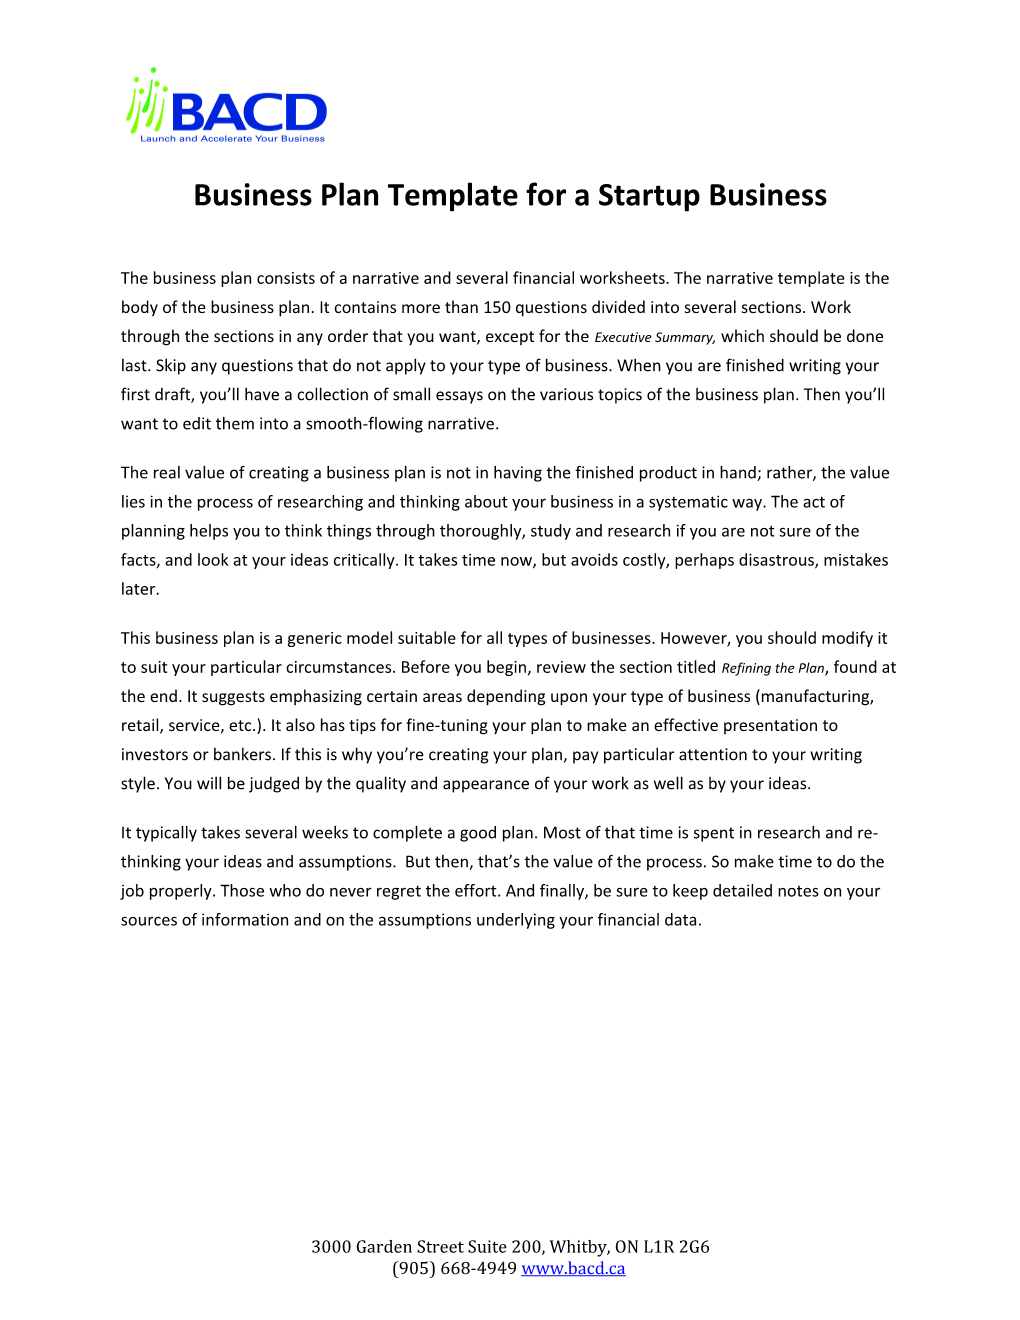 Business Plan Template for a Startup Business